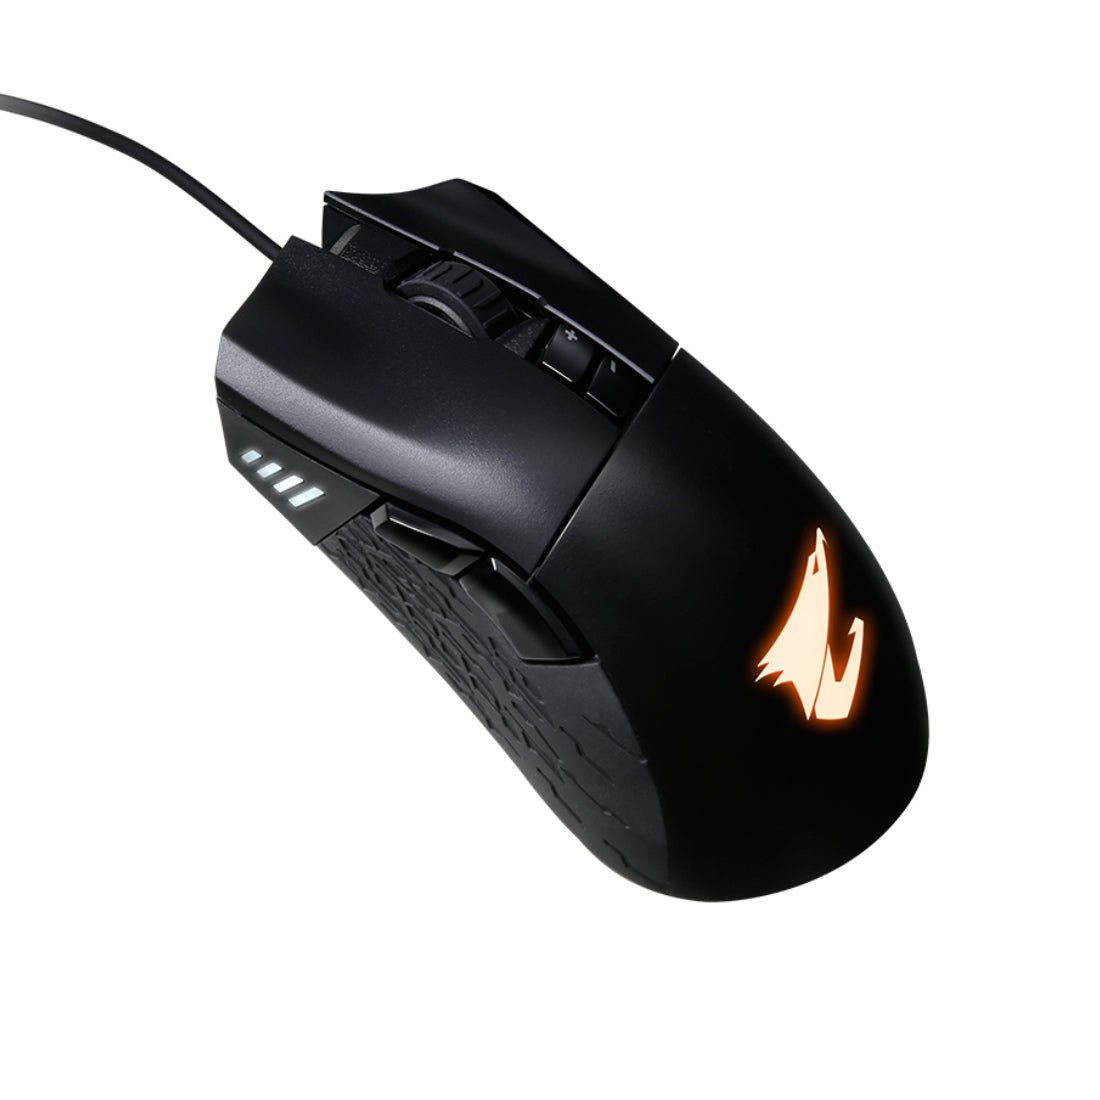 Gigabyte Aorus M3 Wired Gaming Mouse - Matte Black - Store 974 | ستور ٩٧٤